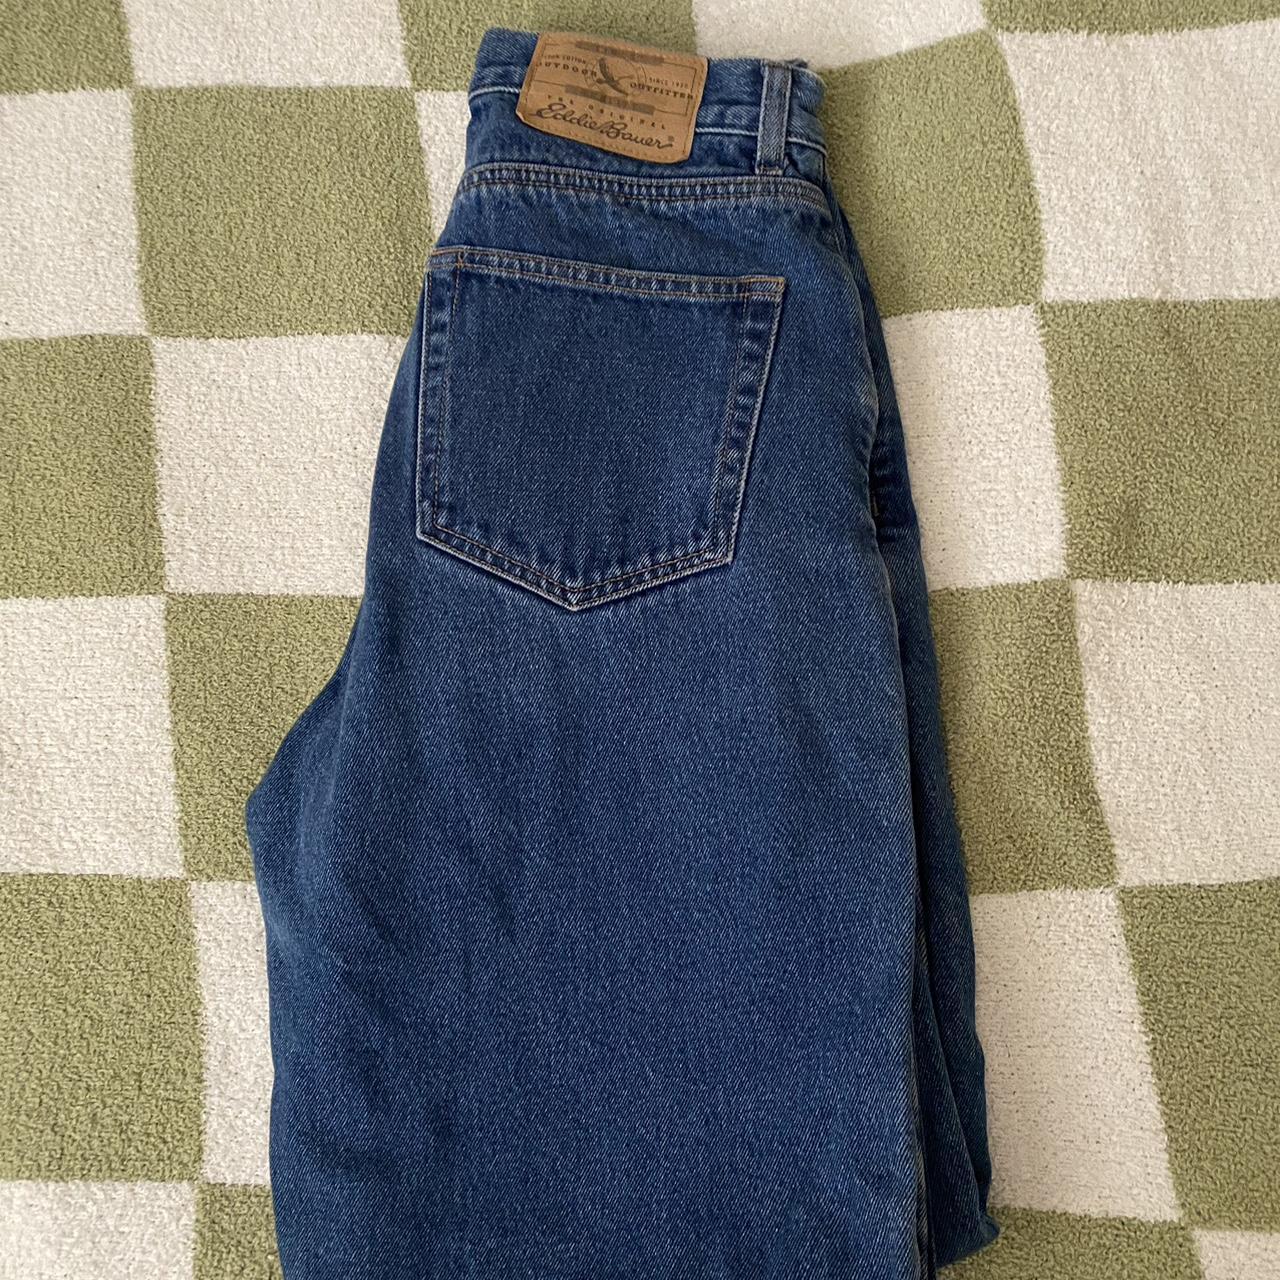 Eddie Bauer Flannel Lined Jeans Very Thick And Depop